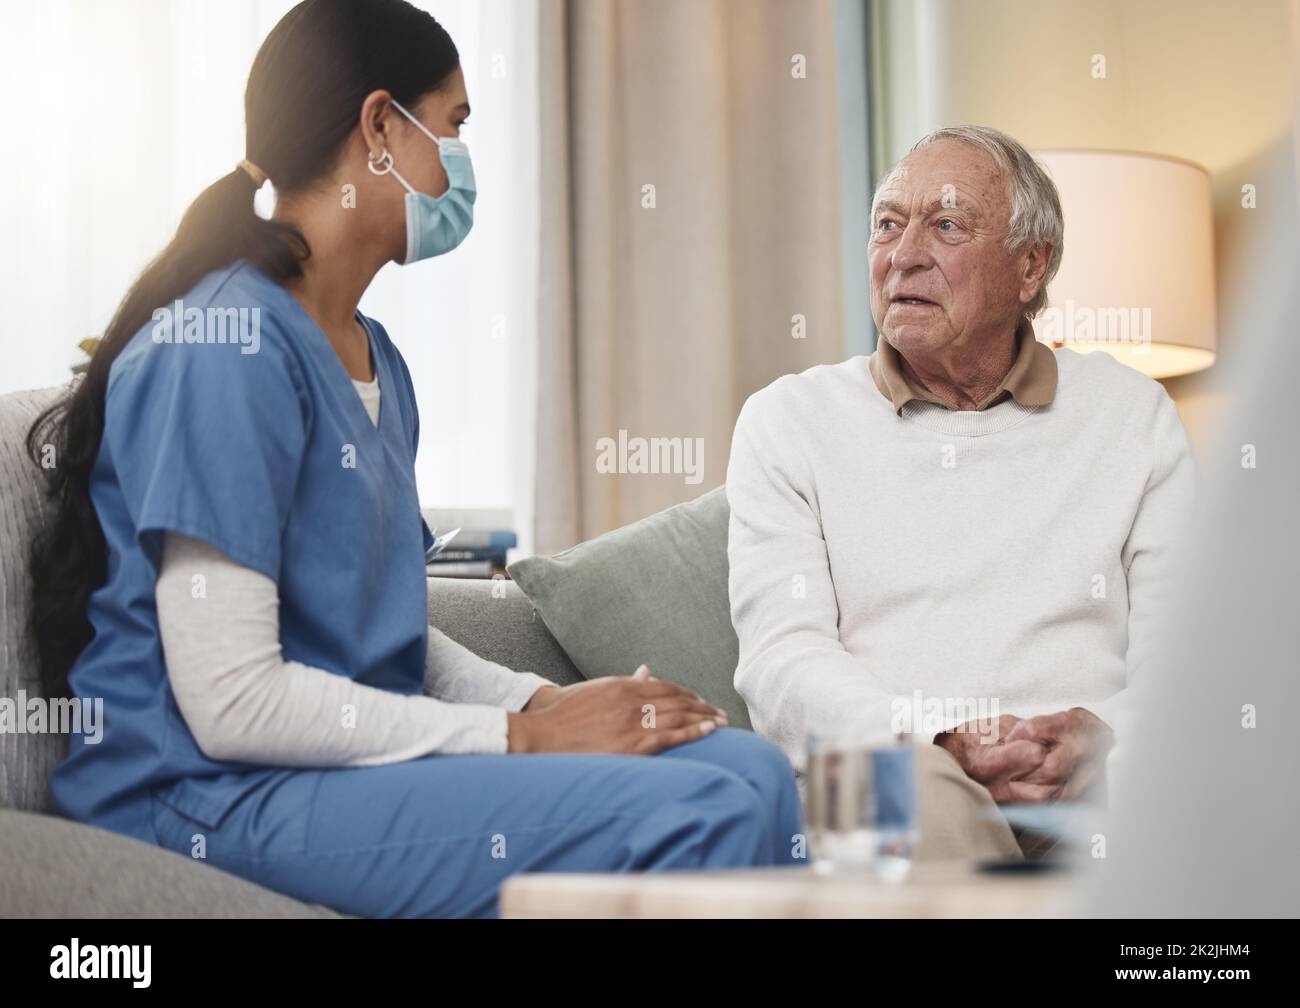 Taking care of you is her passion. Shot of a young female nurse having a checkup with an elderly patient at home. Stock Photo